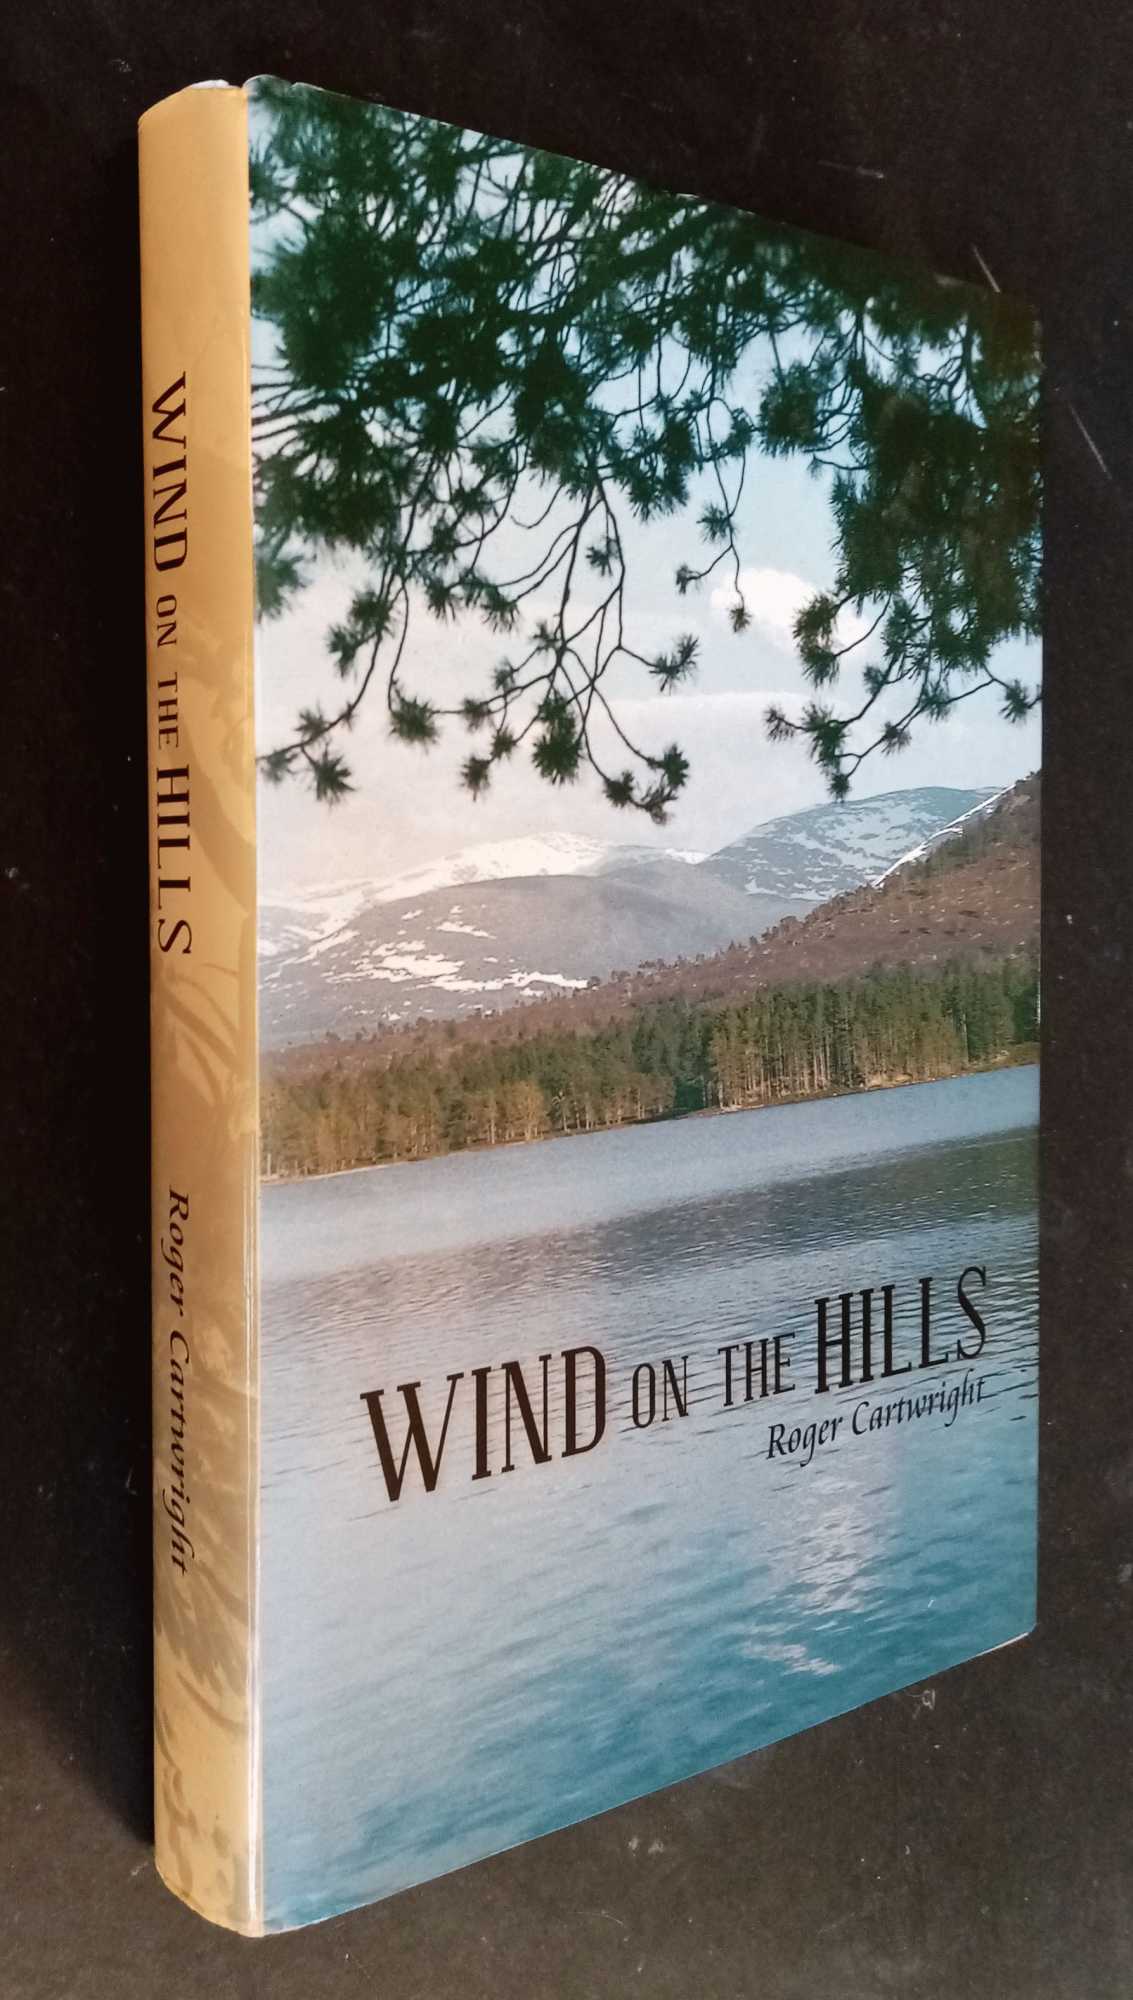 Roger Cartwright - Wind on the Hills   SIGNED